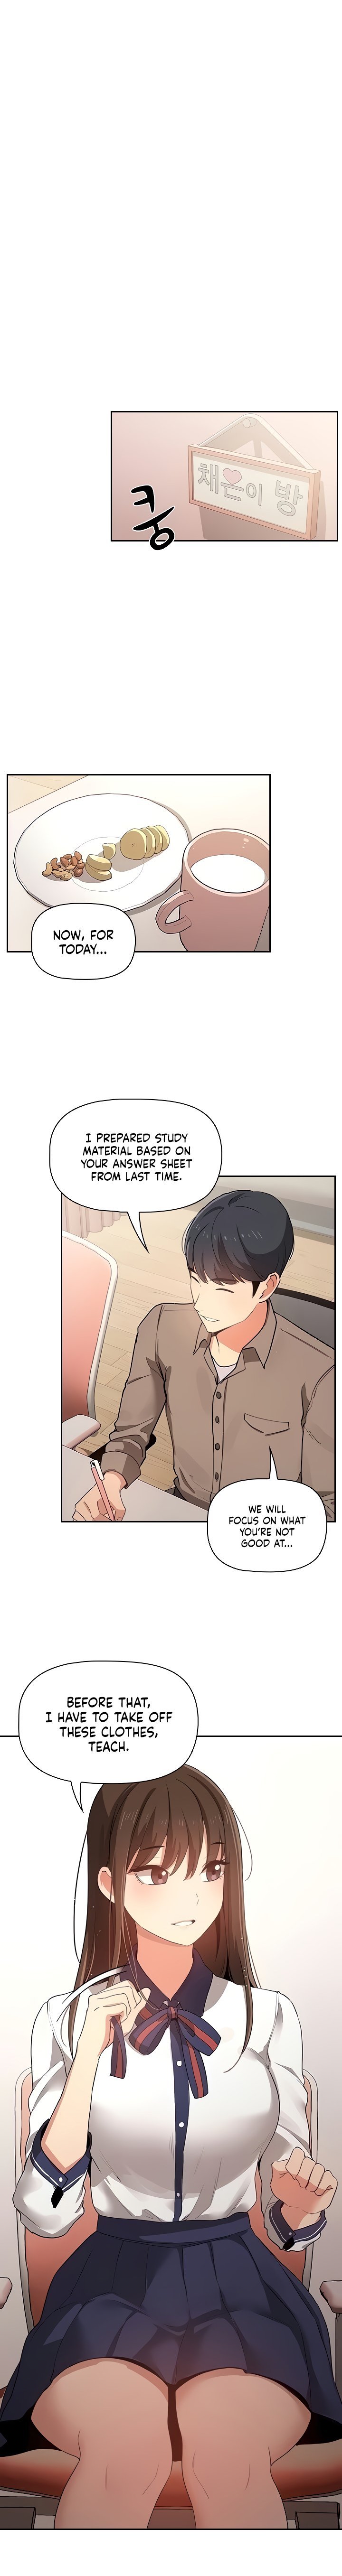 private-tutoring-in-these-difficult-times-chap-3-5